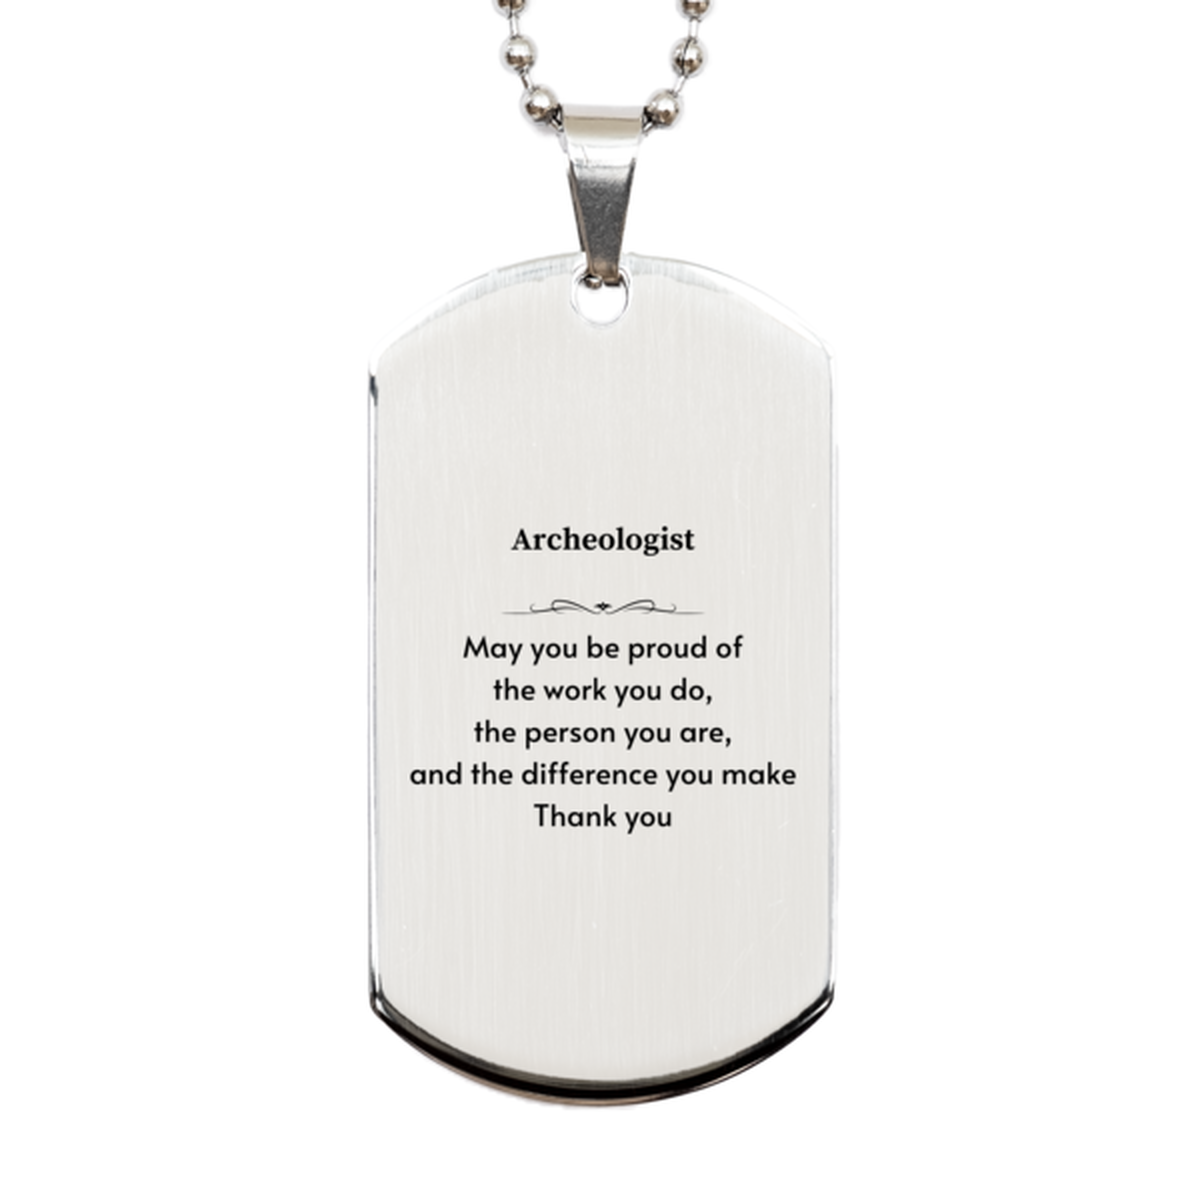 Heartwarming Silver Dog Tag Retirement Coworkers Gifts for Archeologist, Archeologist May You be proud of the work you do, the person you are Gifts for Boss Men Women Friends